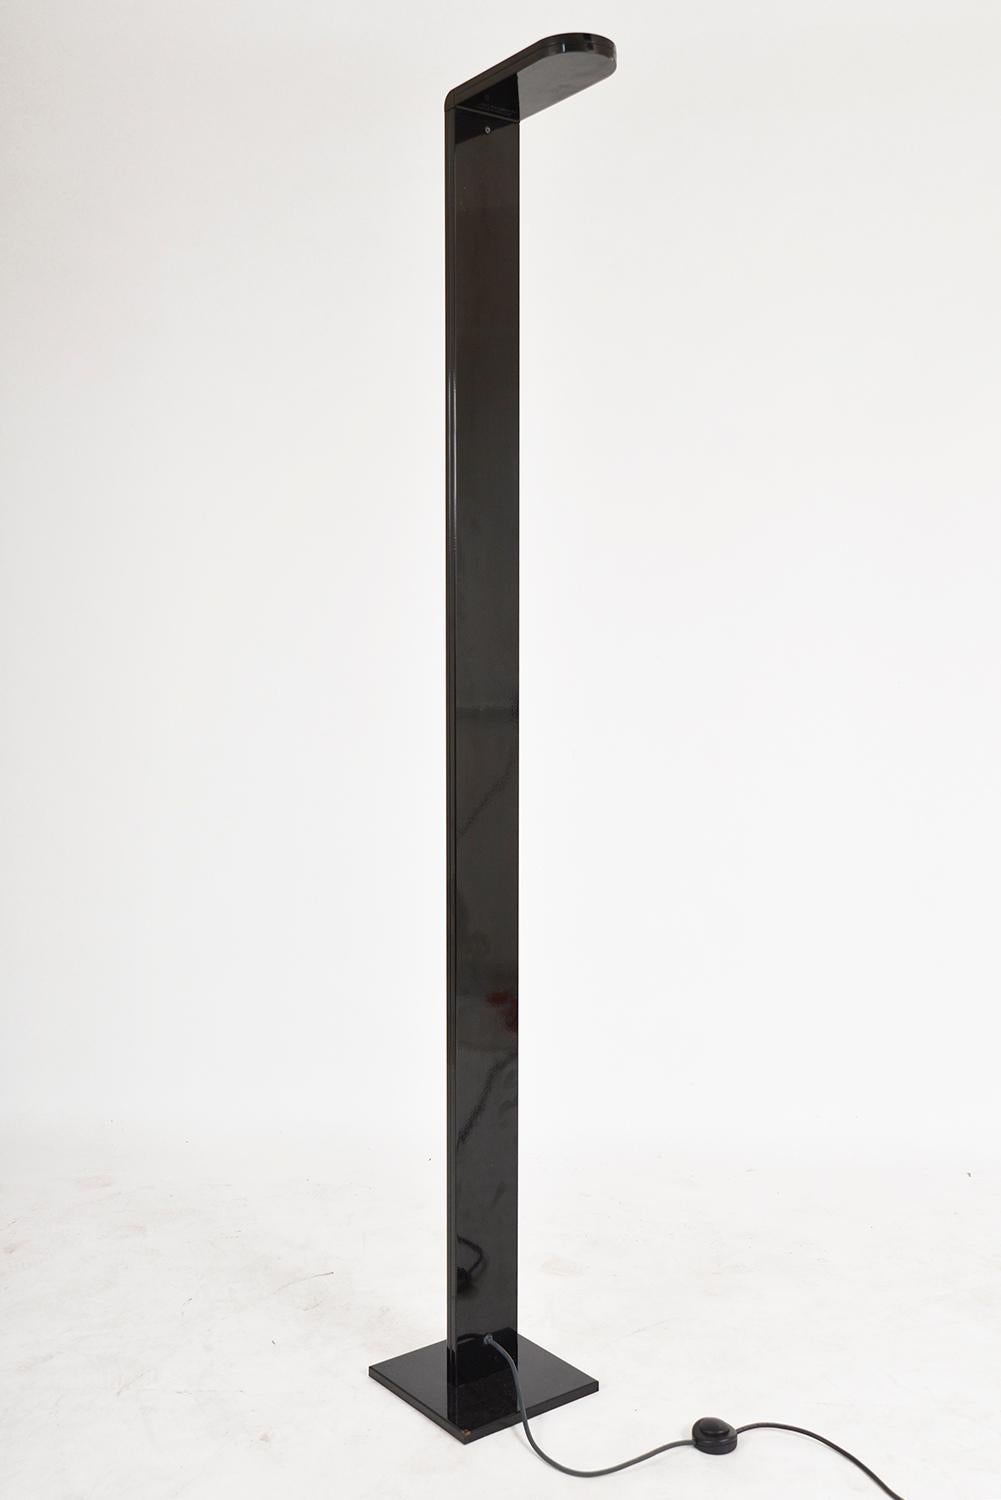 This tall, sleek and slender minimalist floor lamp was designed by Maurizio Bertoni for Ing. Castaldi Illuminazione, Italy. With a super slim profile the aluminium has a black lacquered finish, that is lit by an uplighter, which can't be seen from